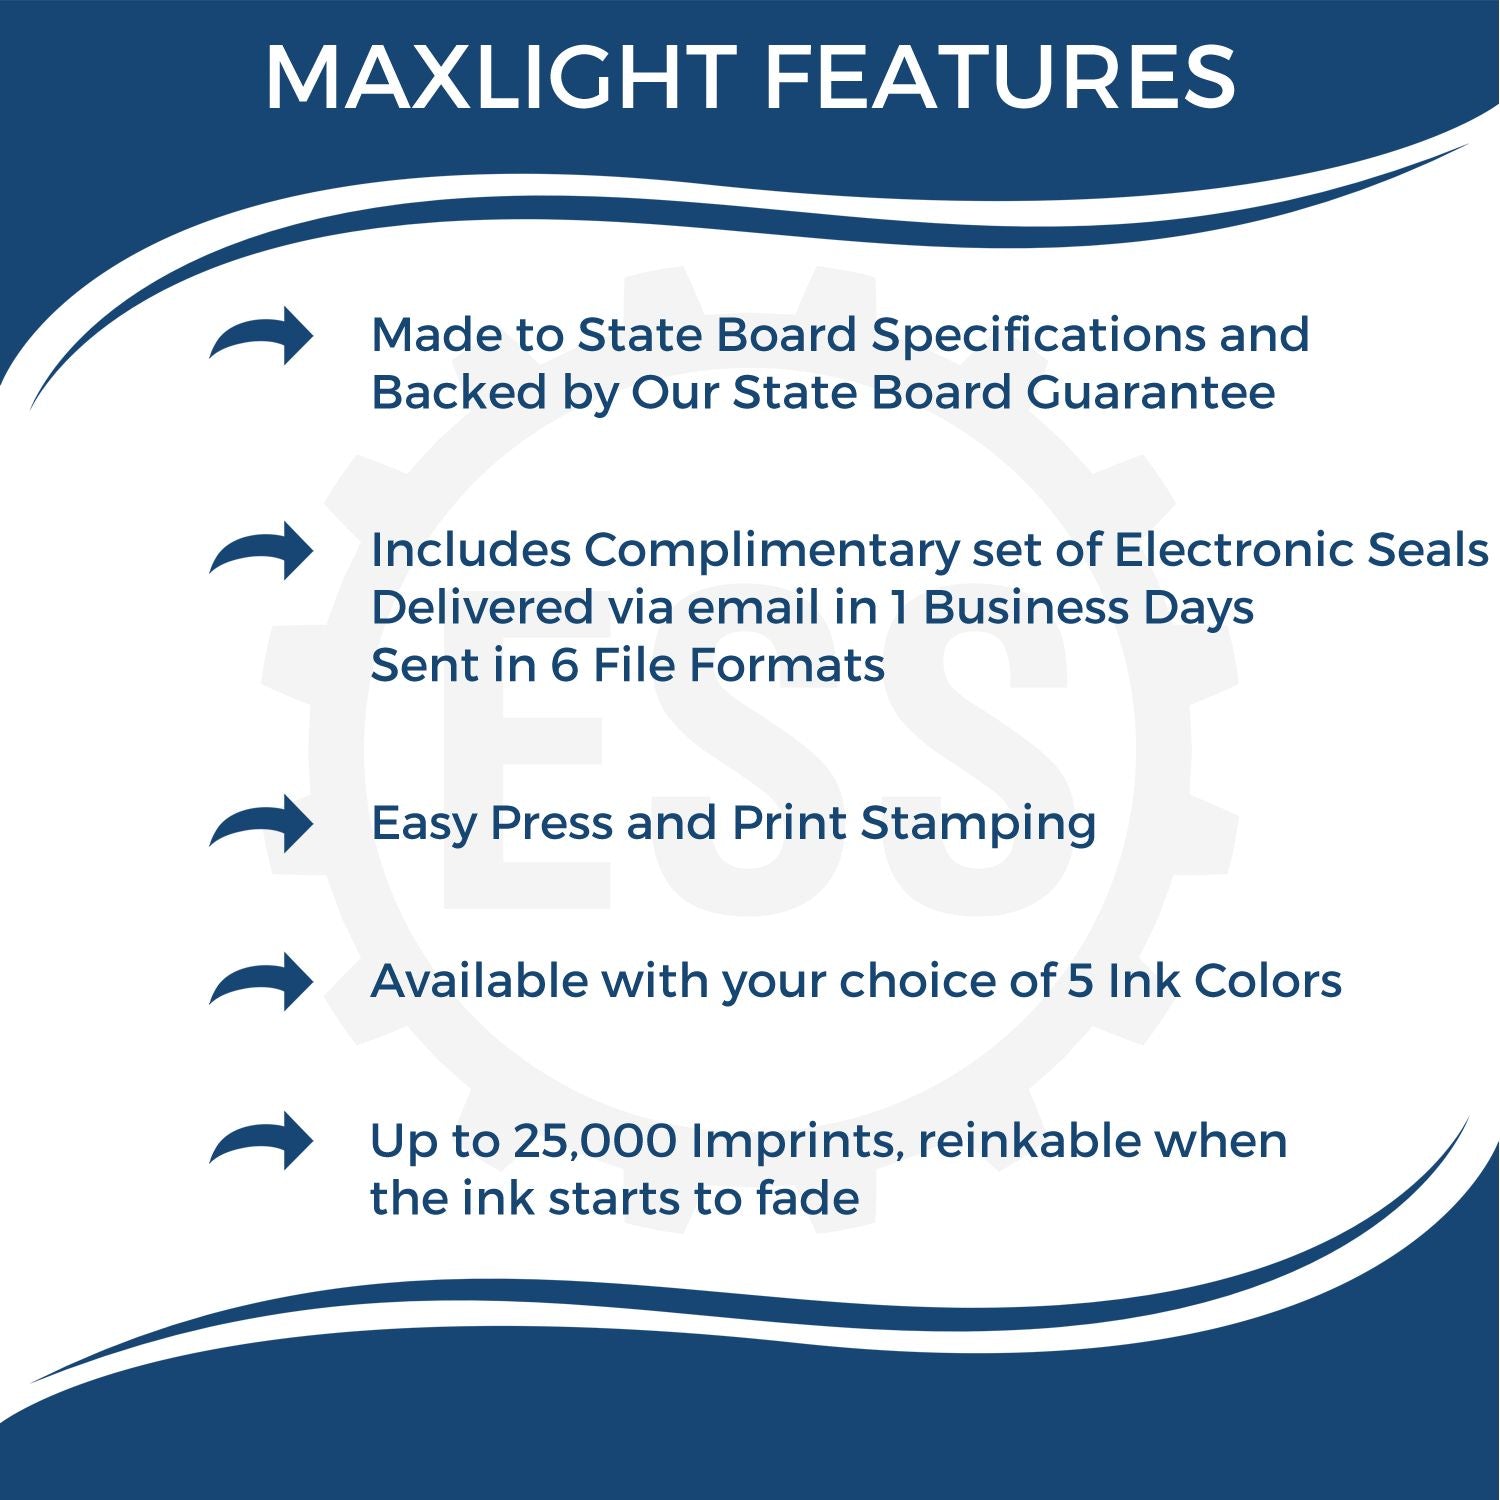 A picture of an infographic highlighting the selling points for the Premium MaxLight Pre-Inked Alaska Landscape Architectural Stamp